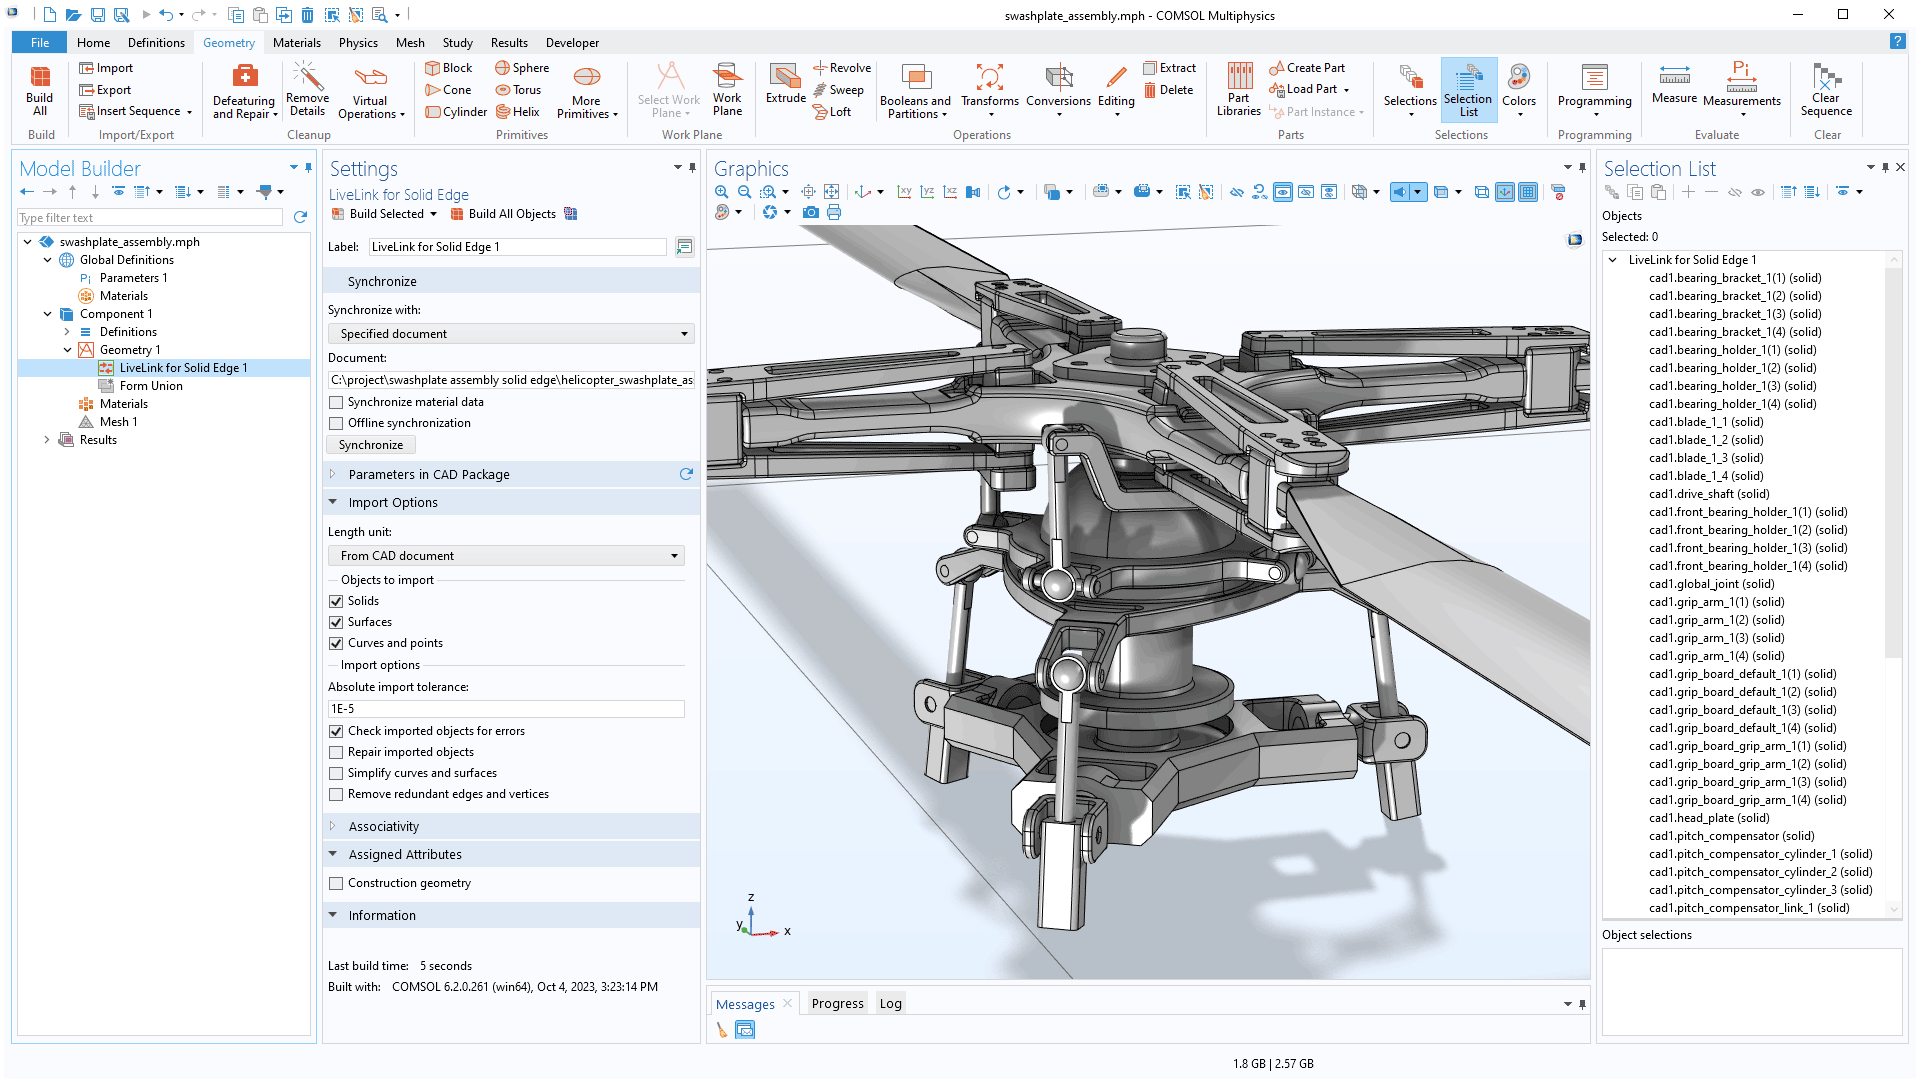 The COMSOL Multiphysics UI showing the Model Builder with the LiveLink for Solid Edge node highlighted, the corresponding Settings window, a helicopter model in the Graphics window, and the Selection List window open.